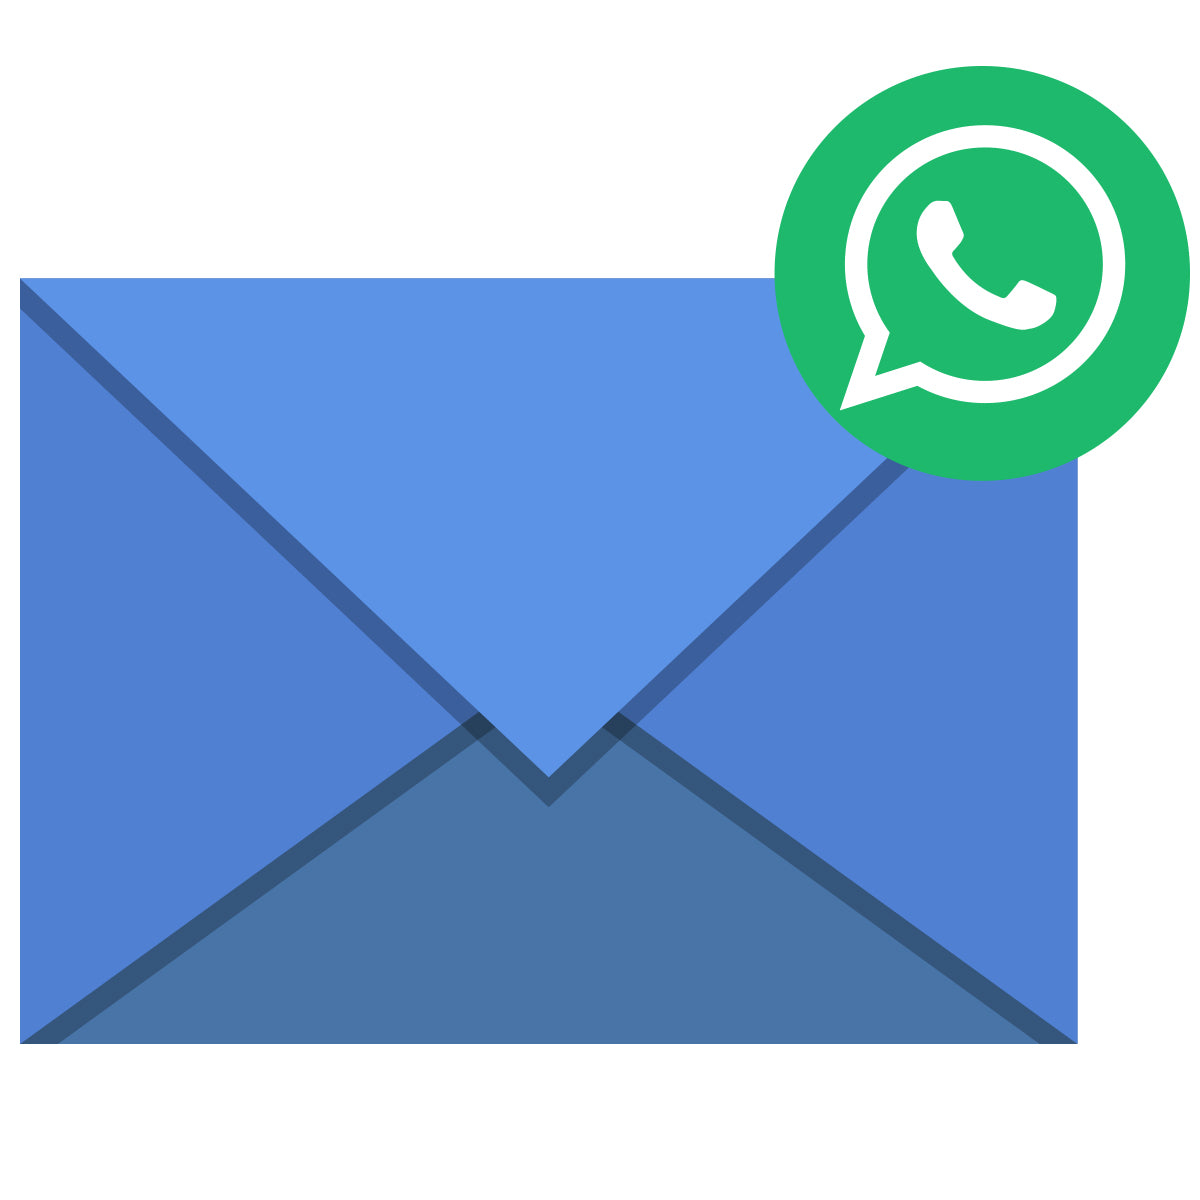 Hire Shopify Experts to integrate WhatsApp Notifications app into a Shopify store